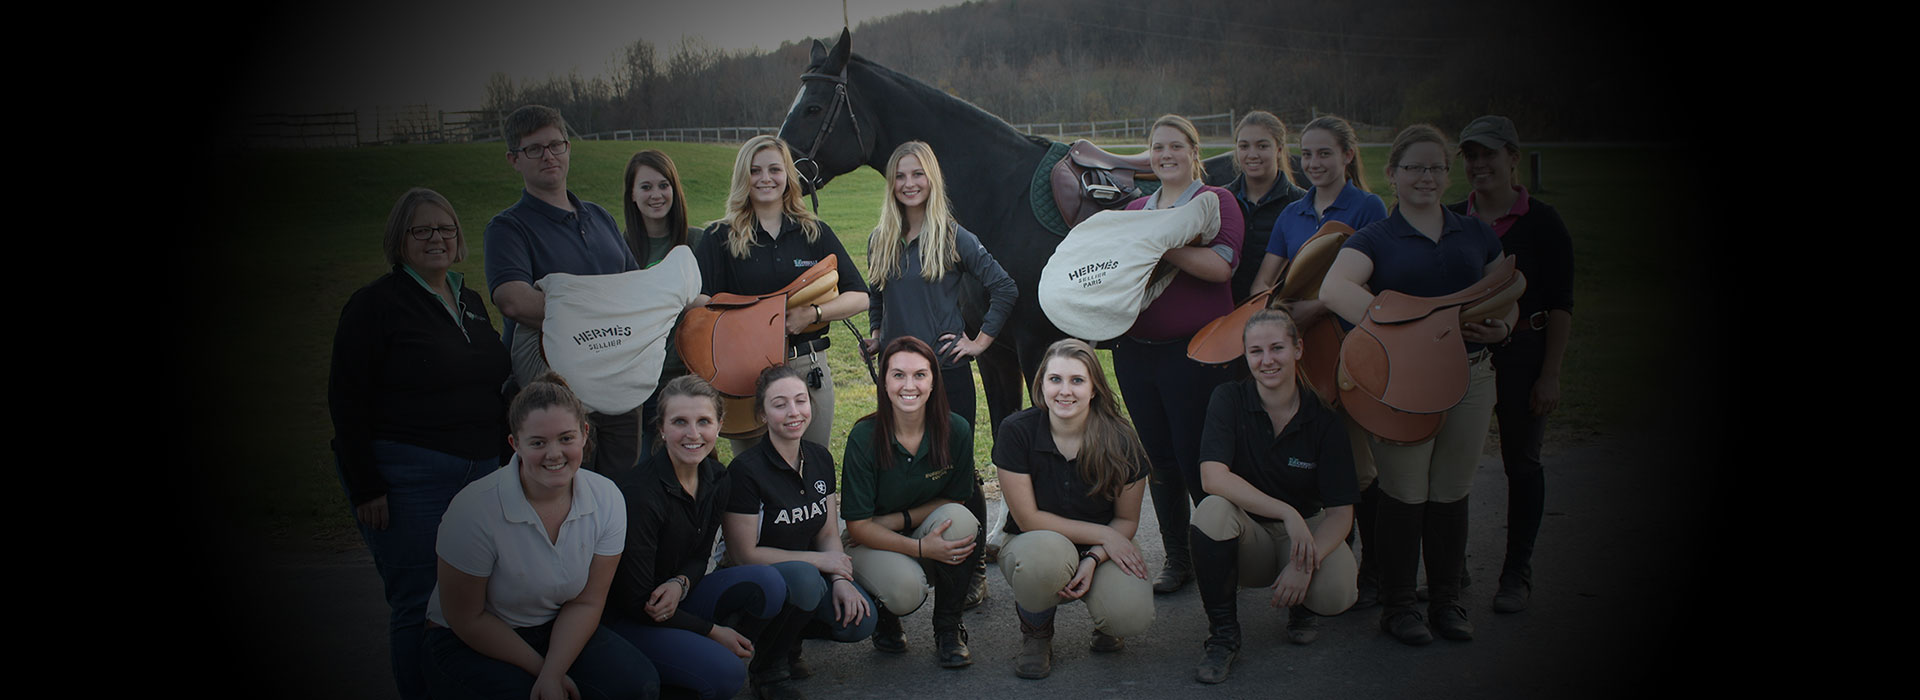 Jimmy Sardelli poses with equine students after donating saddles to the college’s equine programs, while working at Hermés USA.